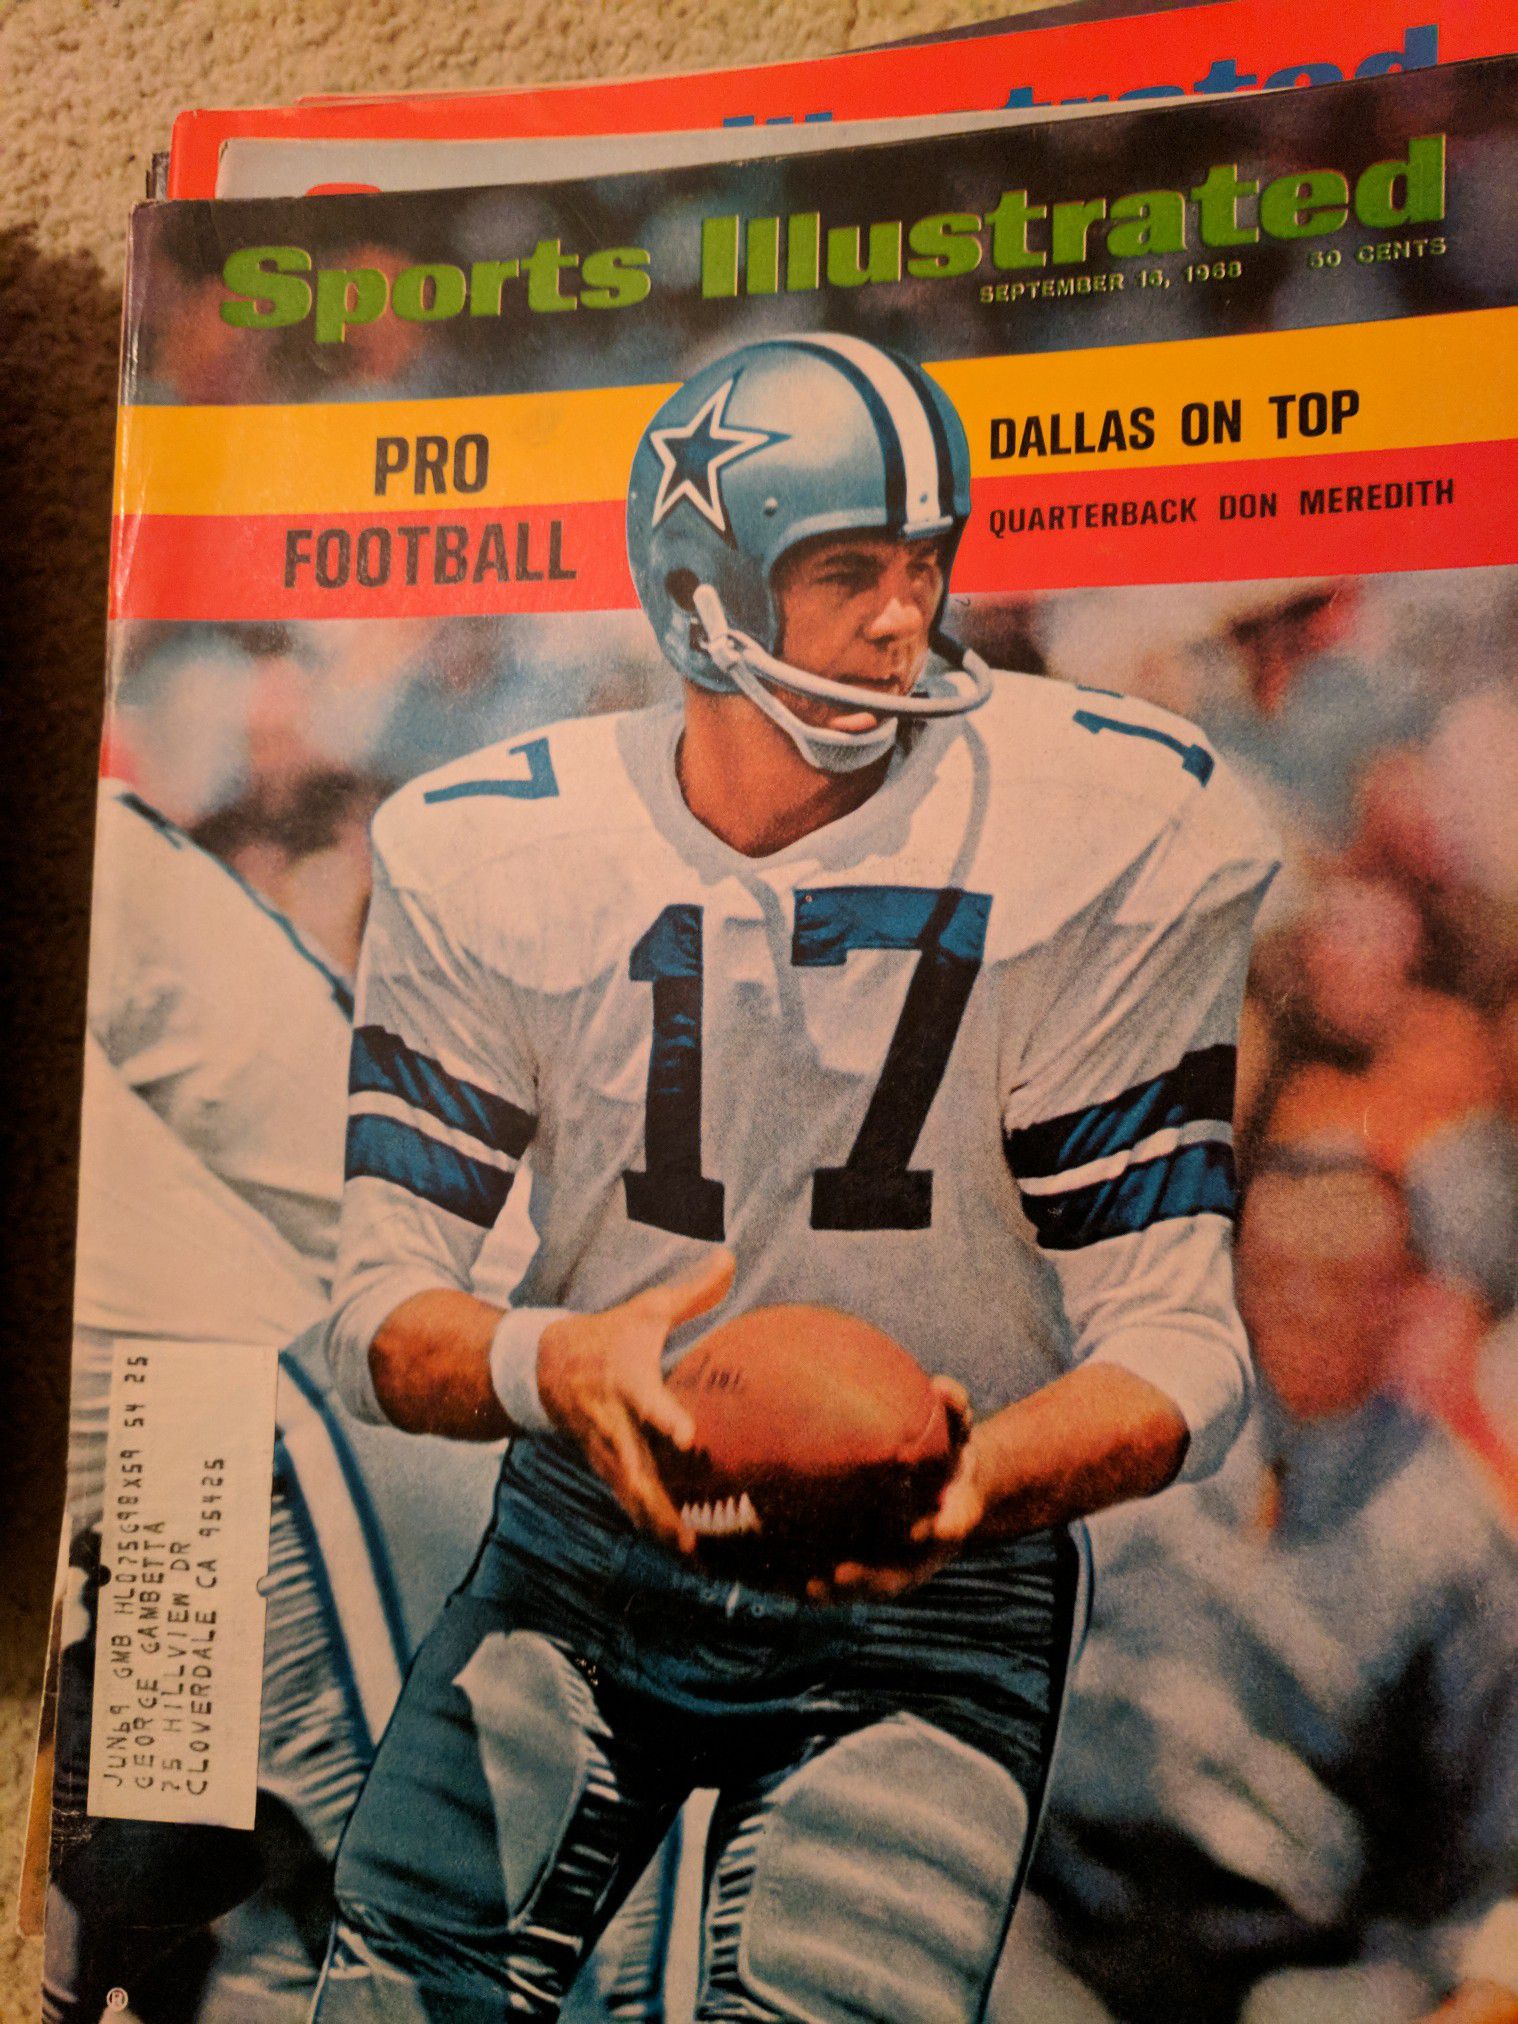 1968 sports illustrated Don Meredith